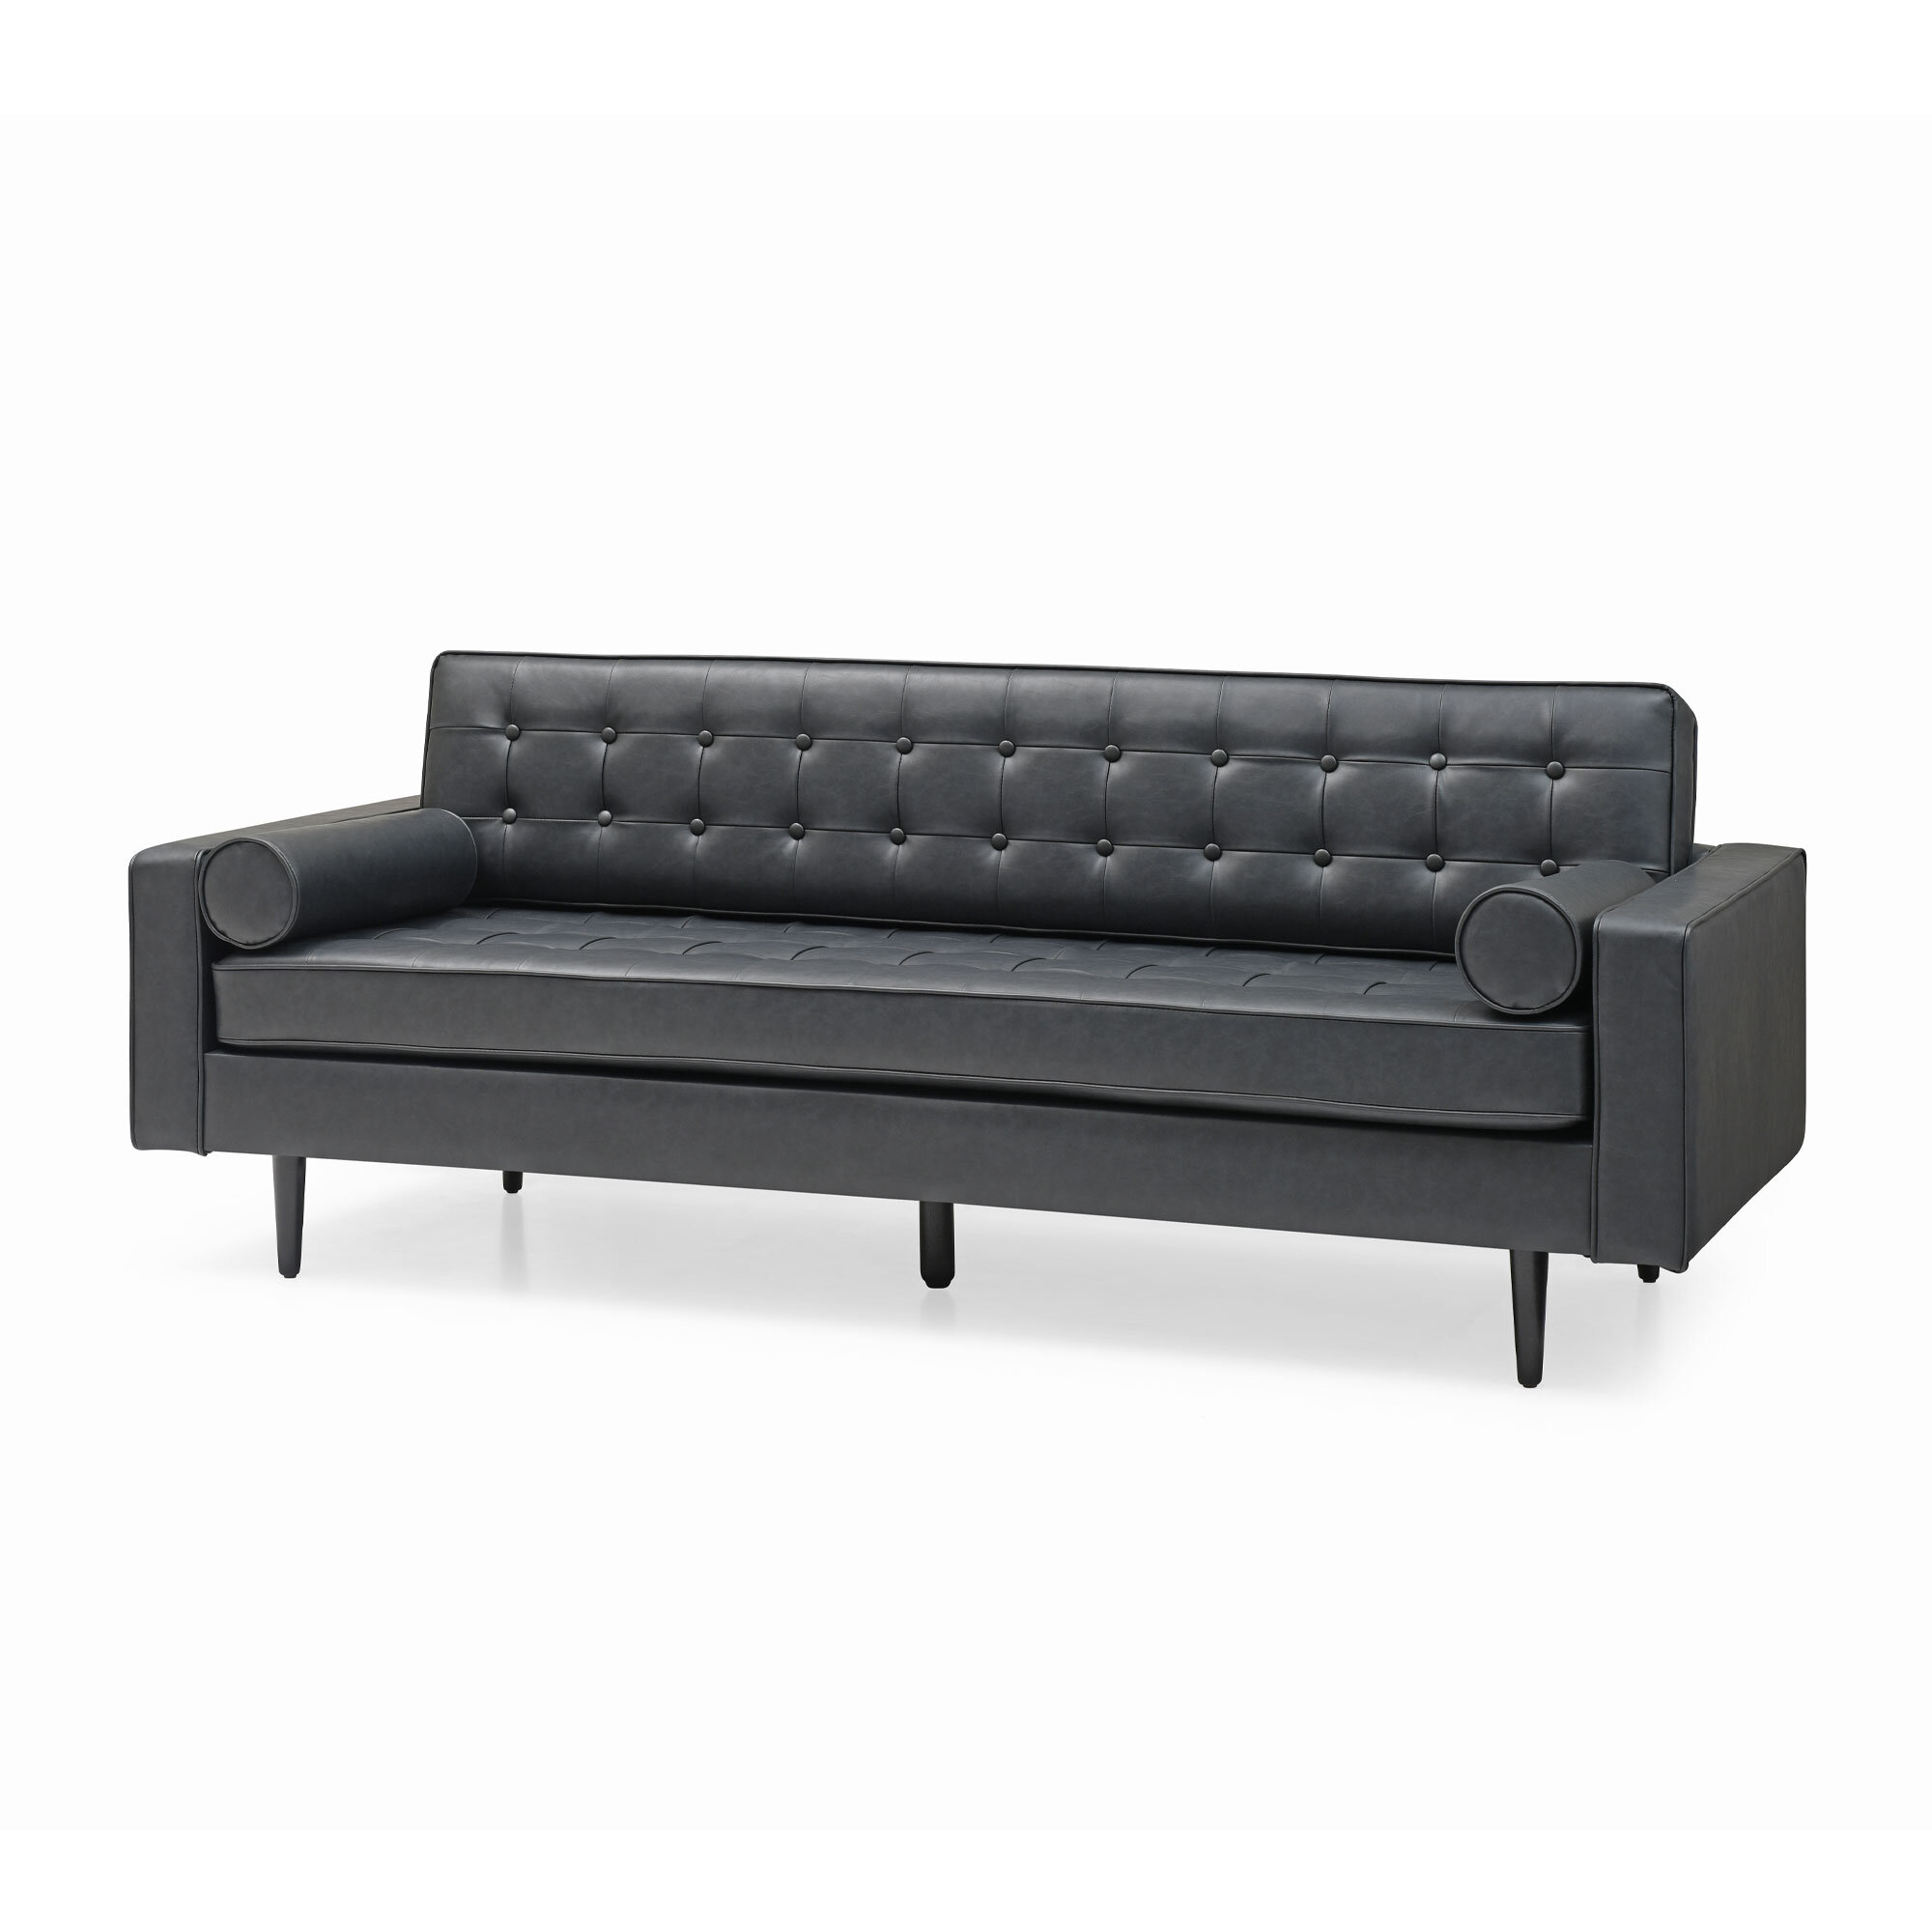 Duval 85” Faux Leather Square Arm Sofa with Reversible Cushions